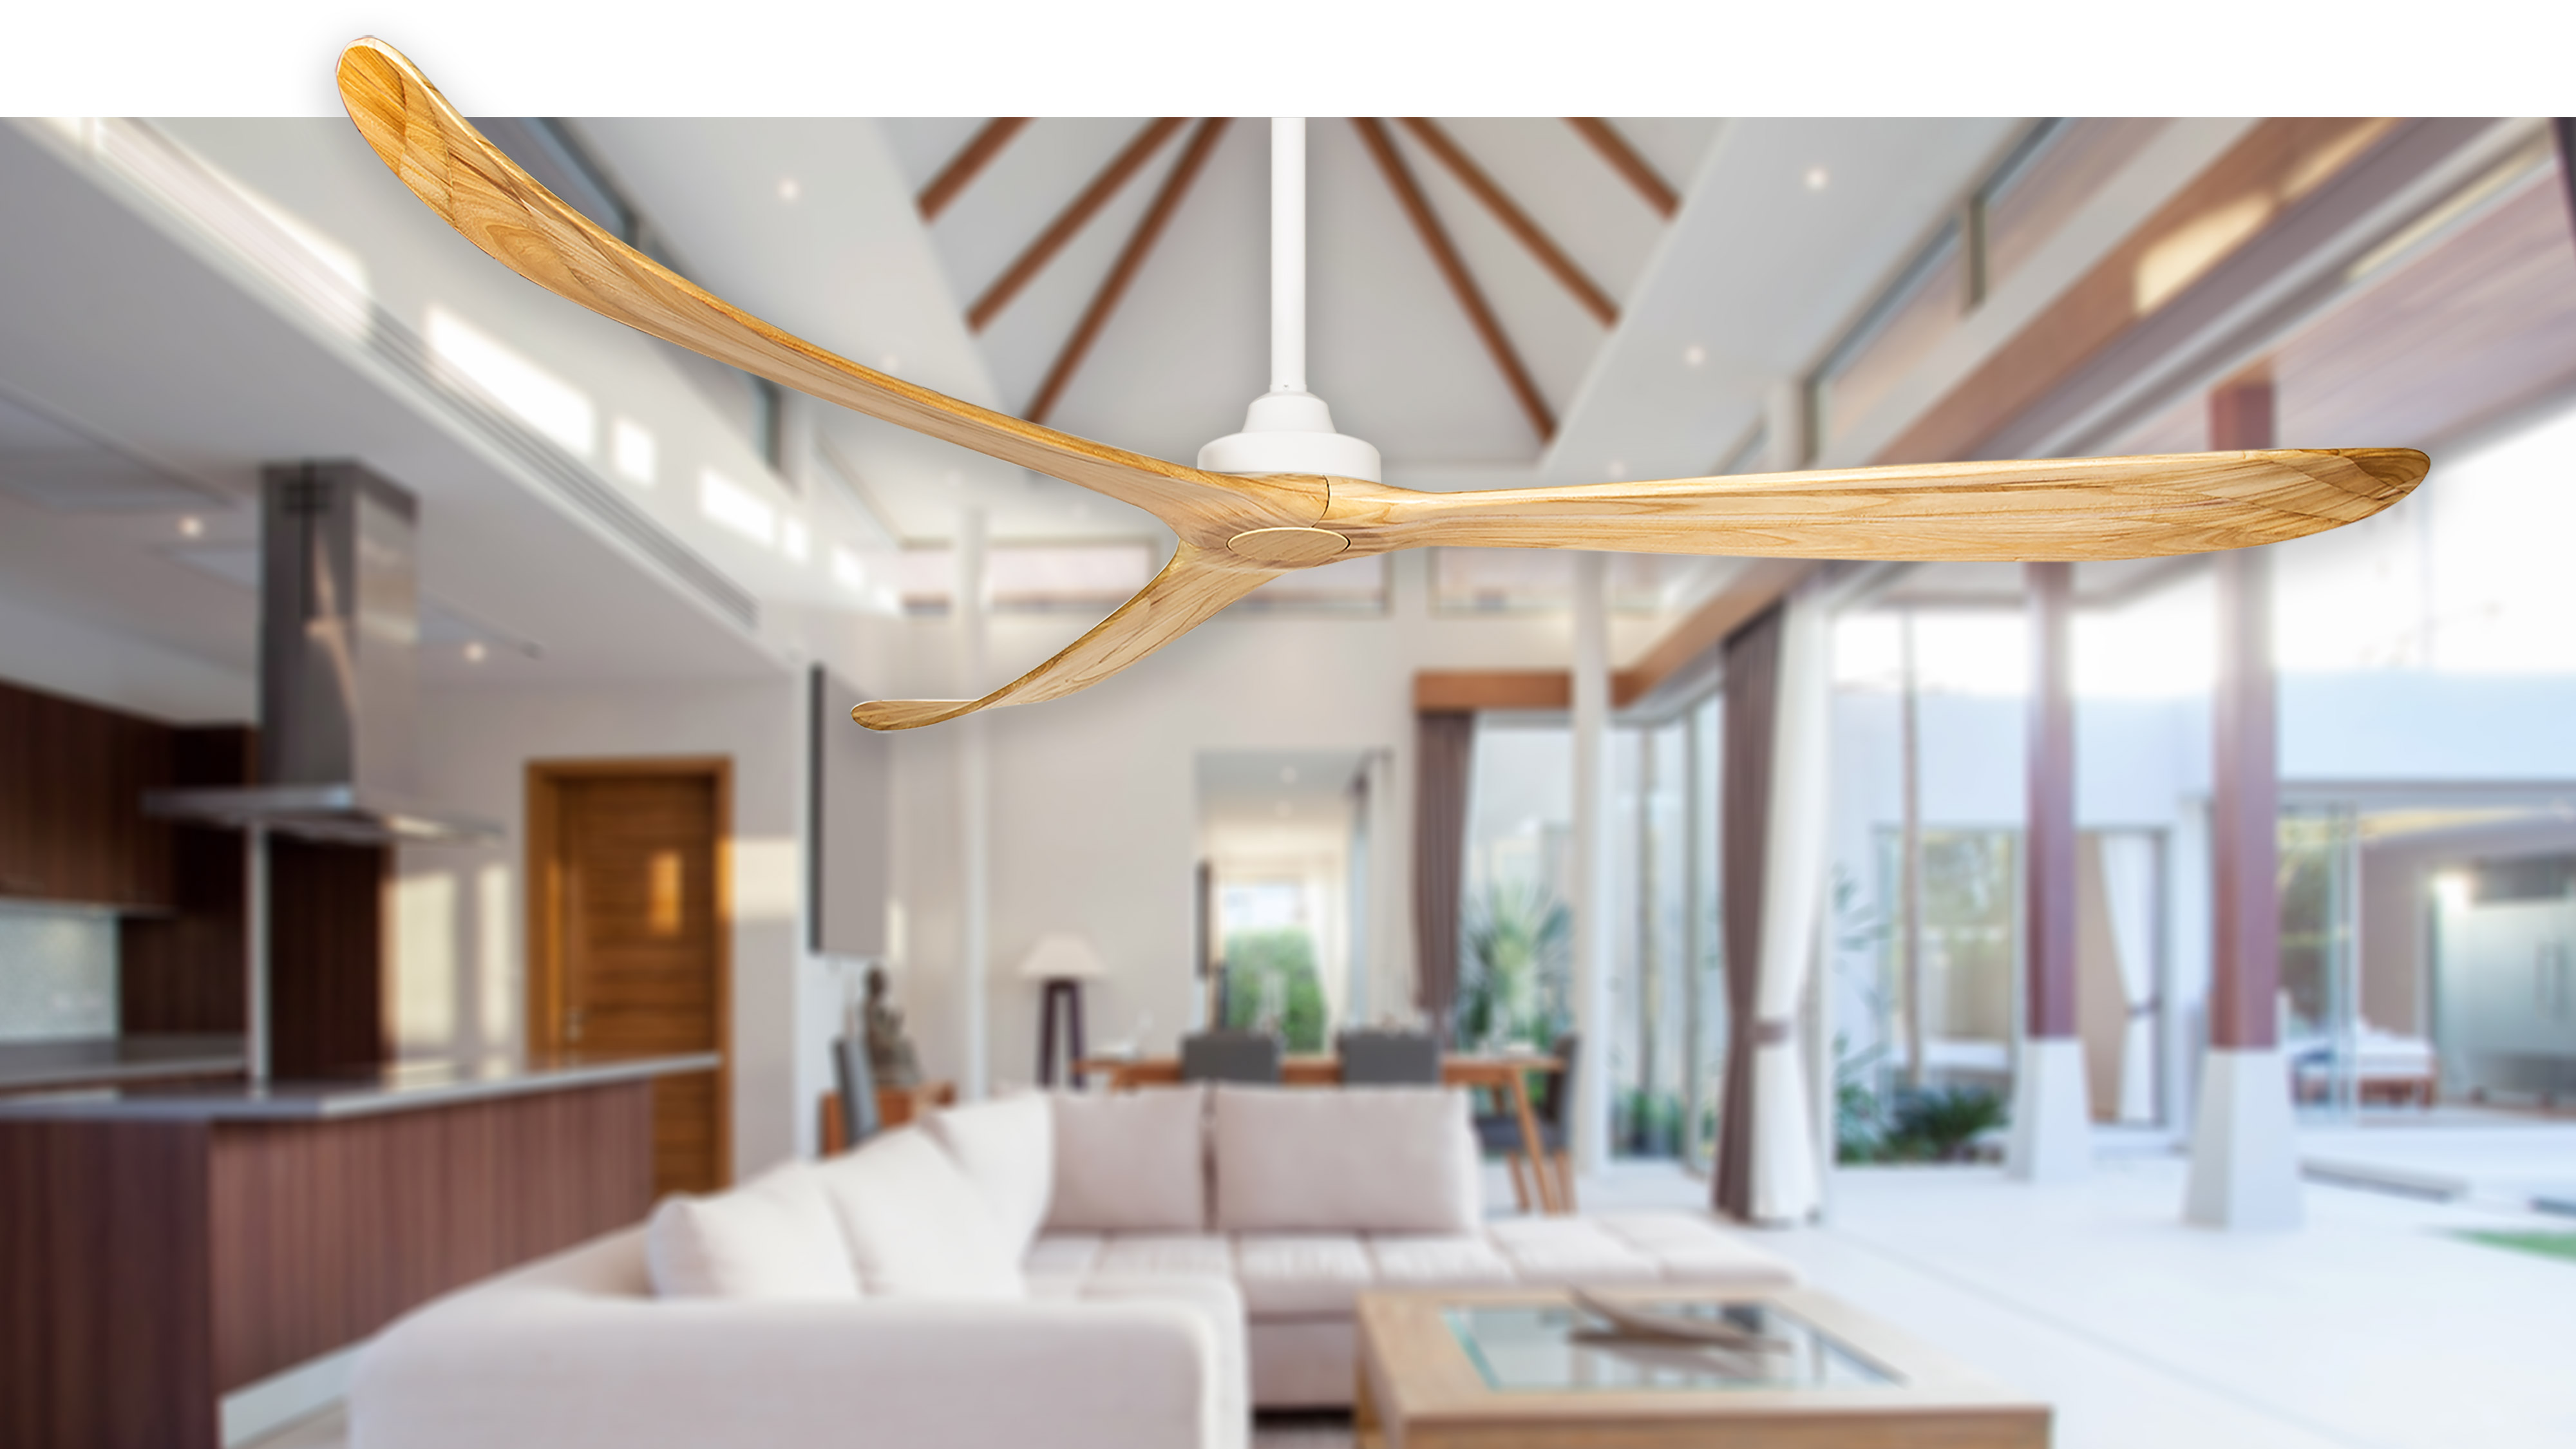 100" Kirra DC Ceiling Fan in White with Natural timber blades